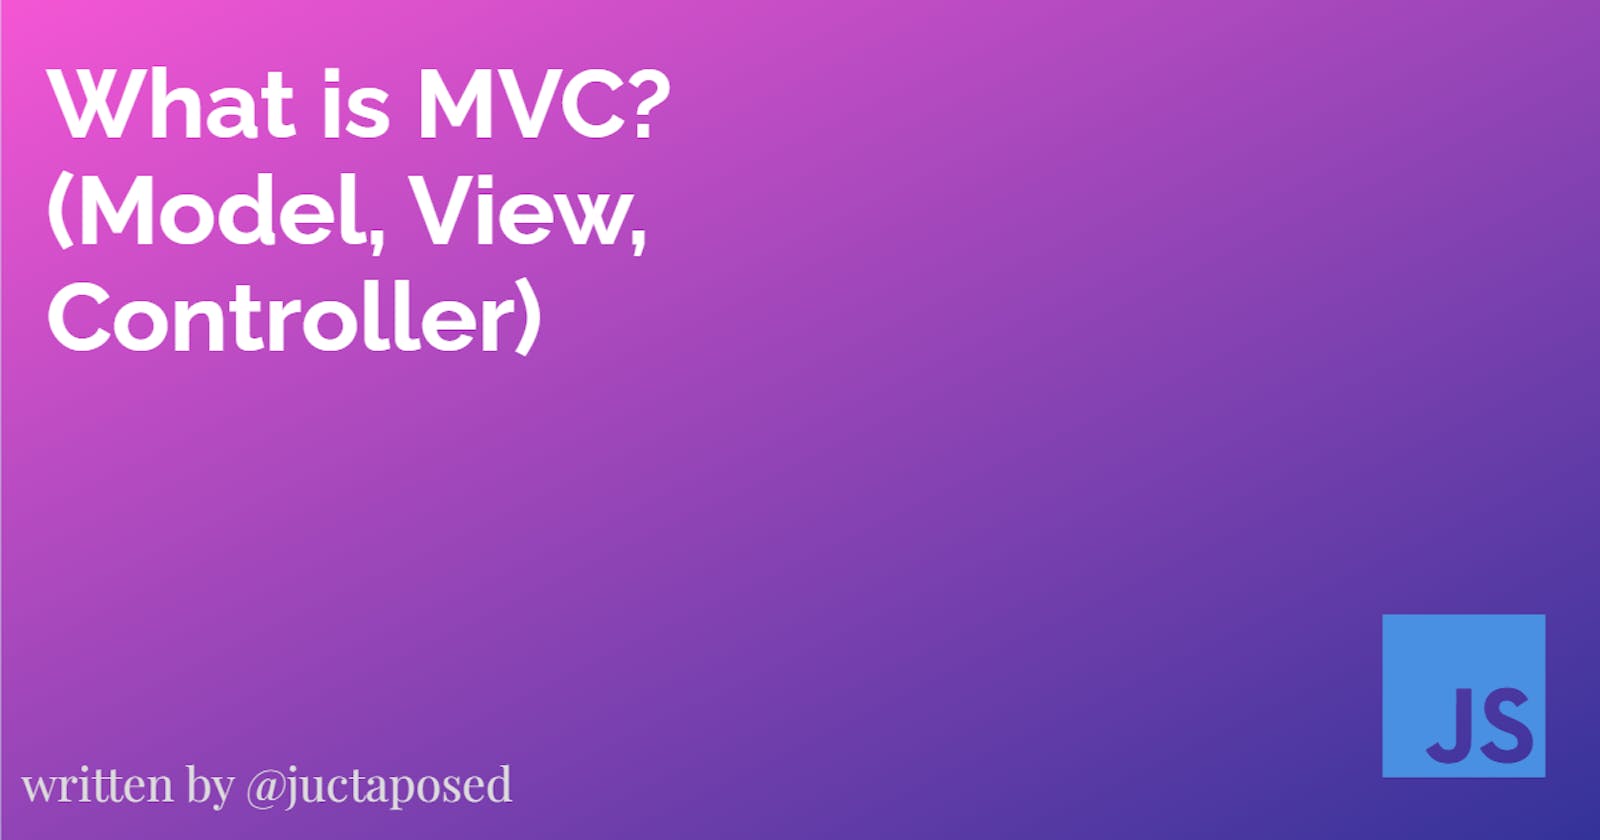 What is MVC? (Model, View, Controller)